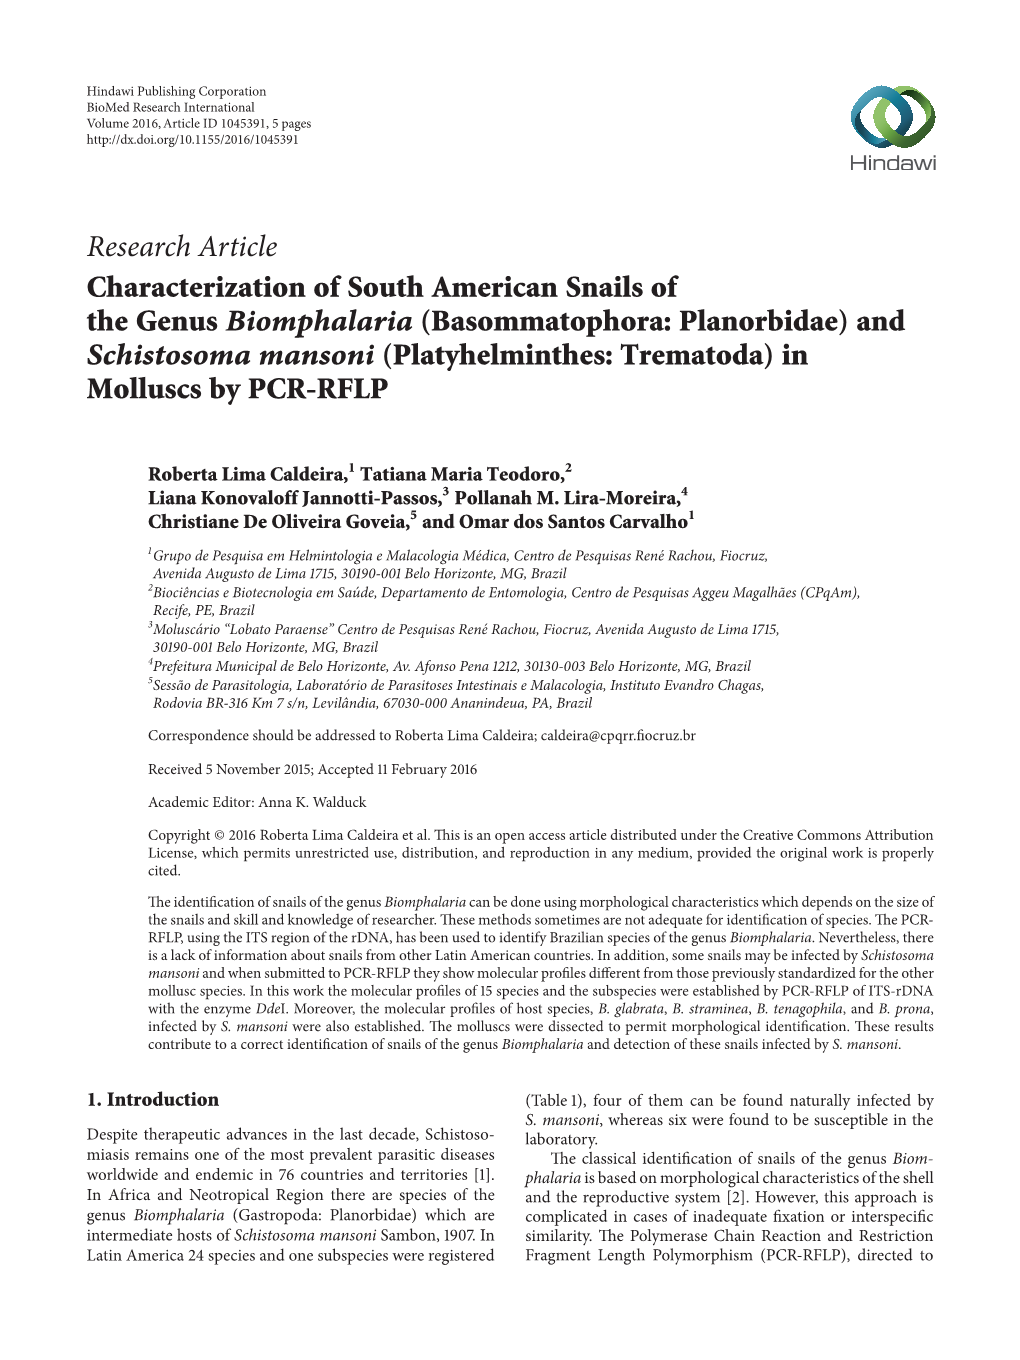 Characterization of South American Snails of the Genus Biomphalaria